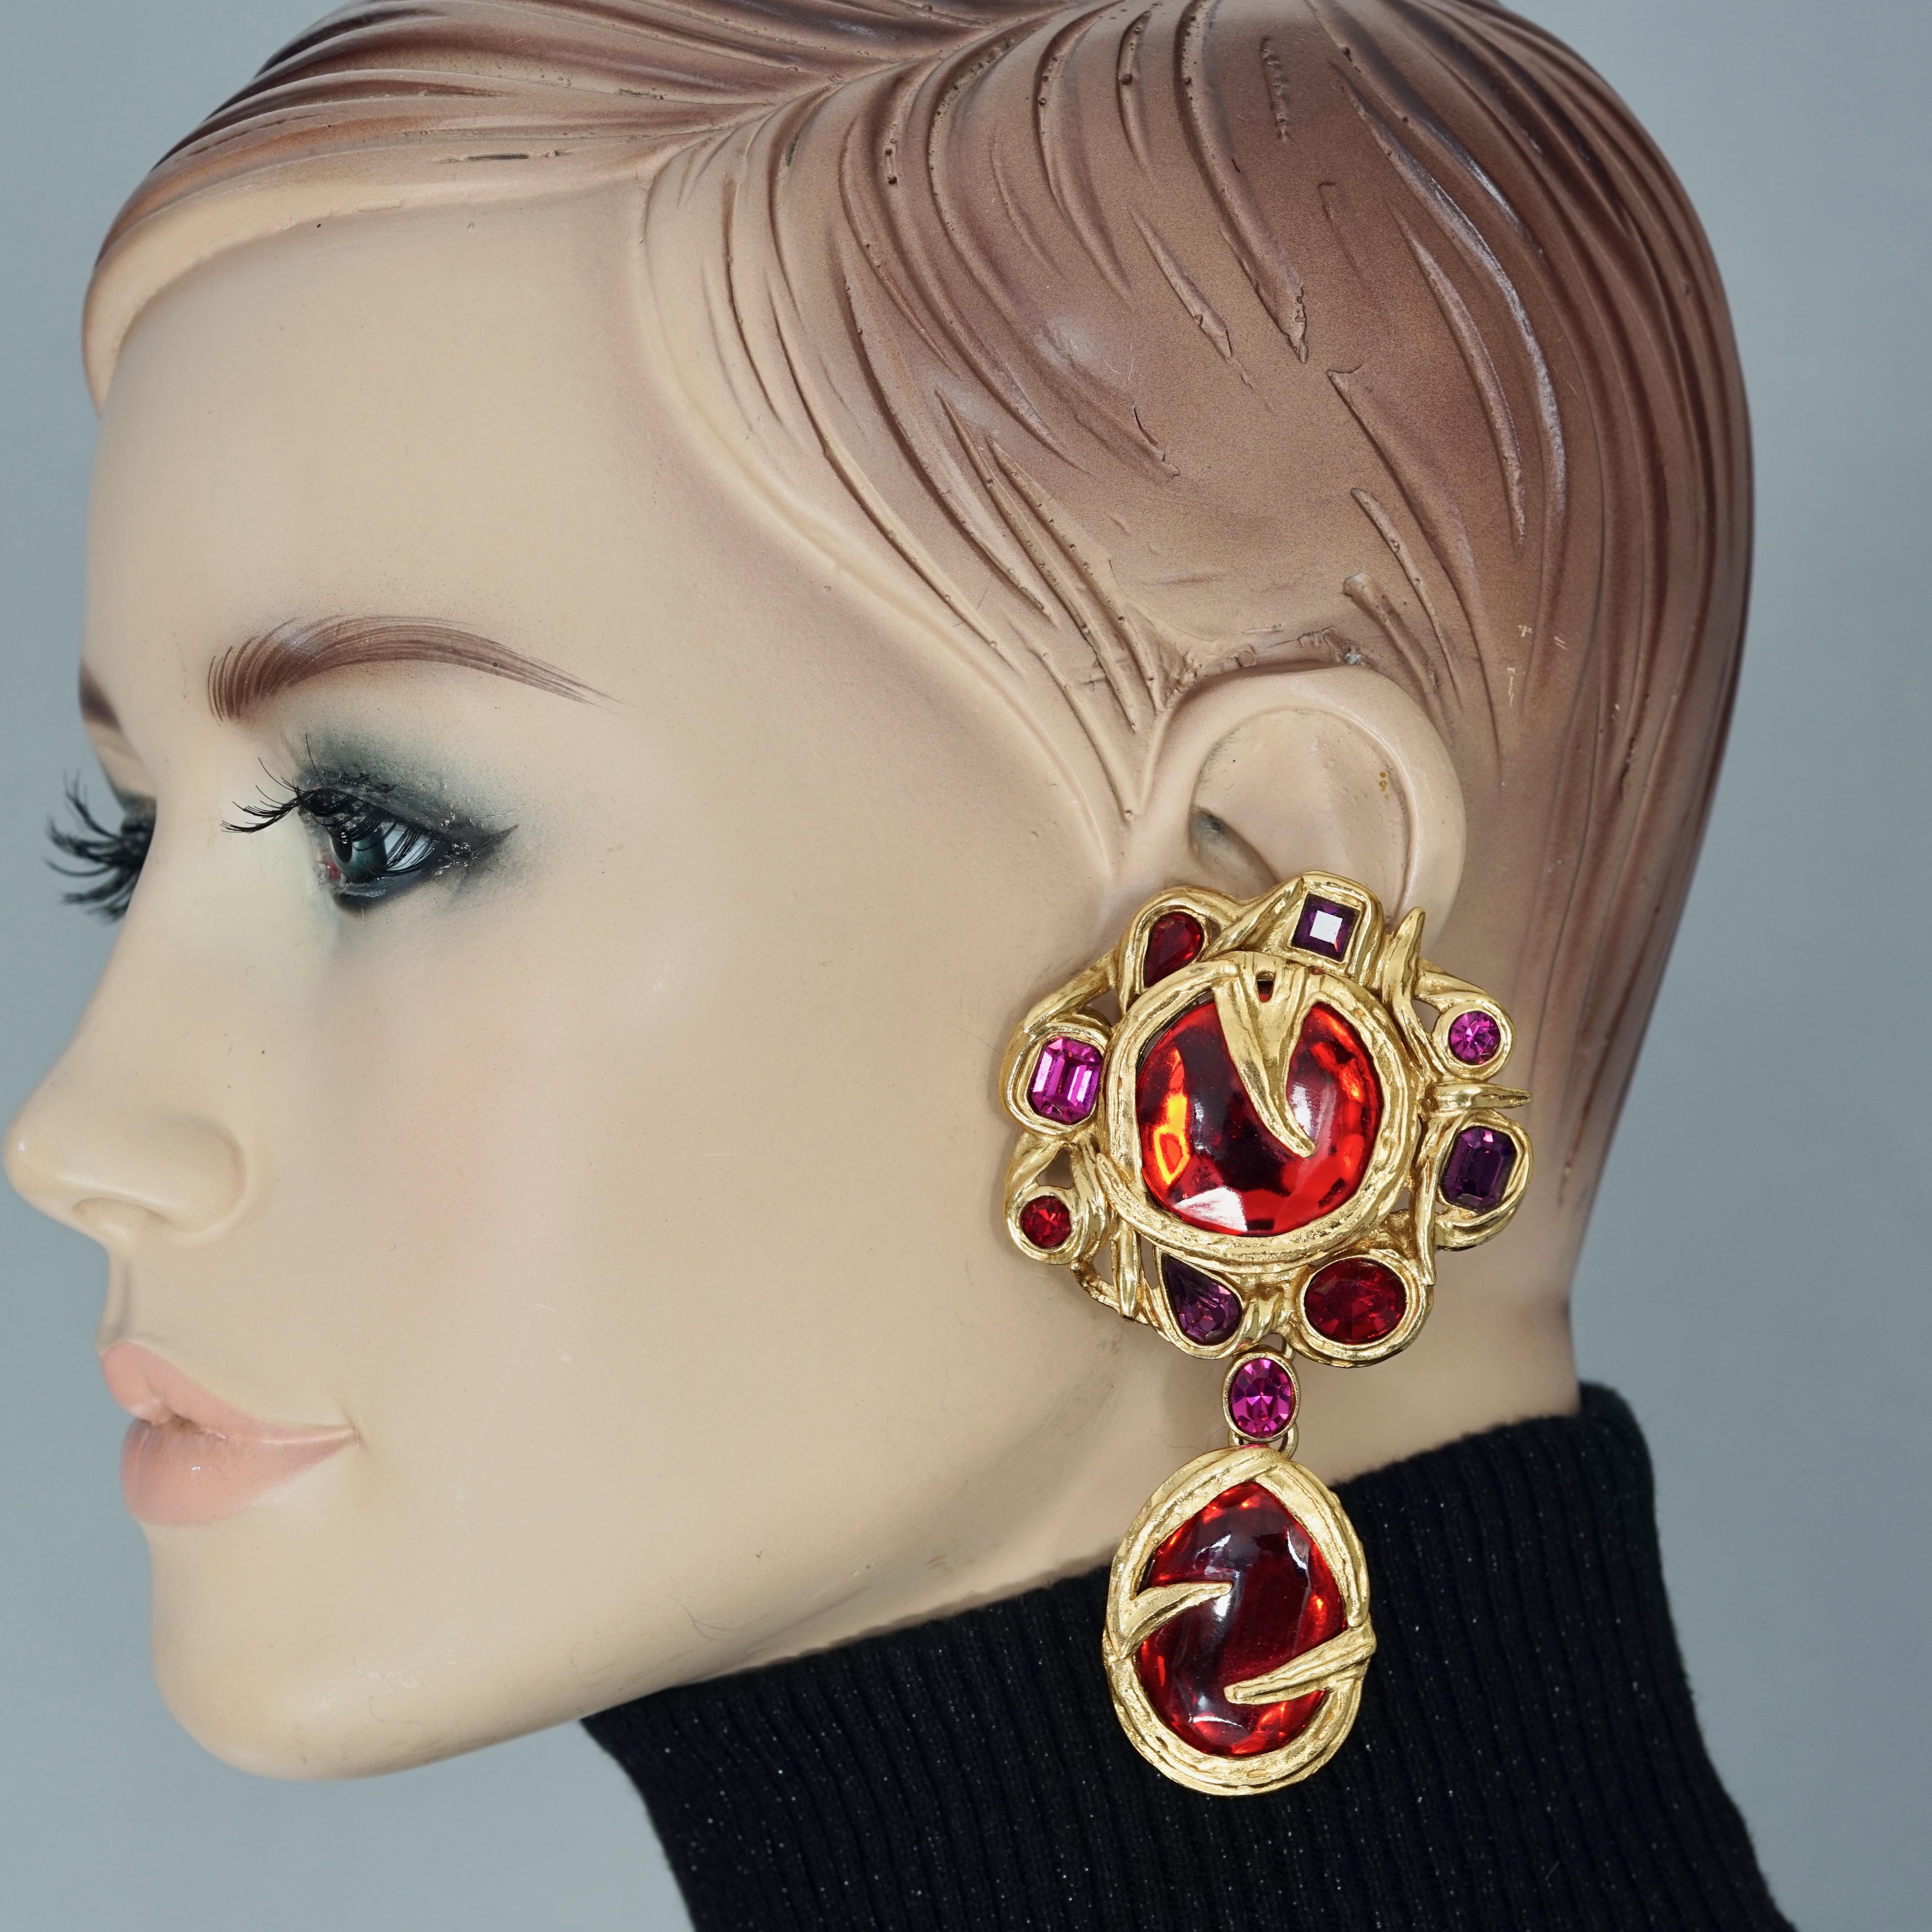 Vintage YVES SAINT LAURENT Ysl Goossens Ruby Rhinestone Flower Dangling Earrings

Measurements:
Height: 3.54 inches (9.7 cms)
Width: 2.16 inches (5.5 cms)
Weight per Earring: 54 grams

Features:
- 100% Authentic YVES SAINT LAURENT by Robert